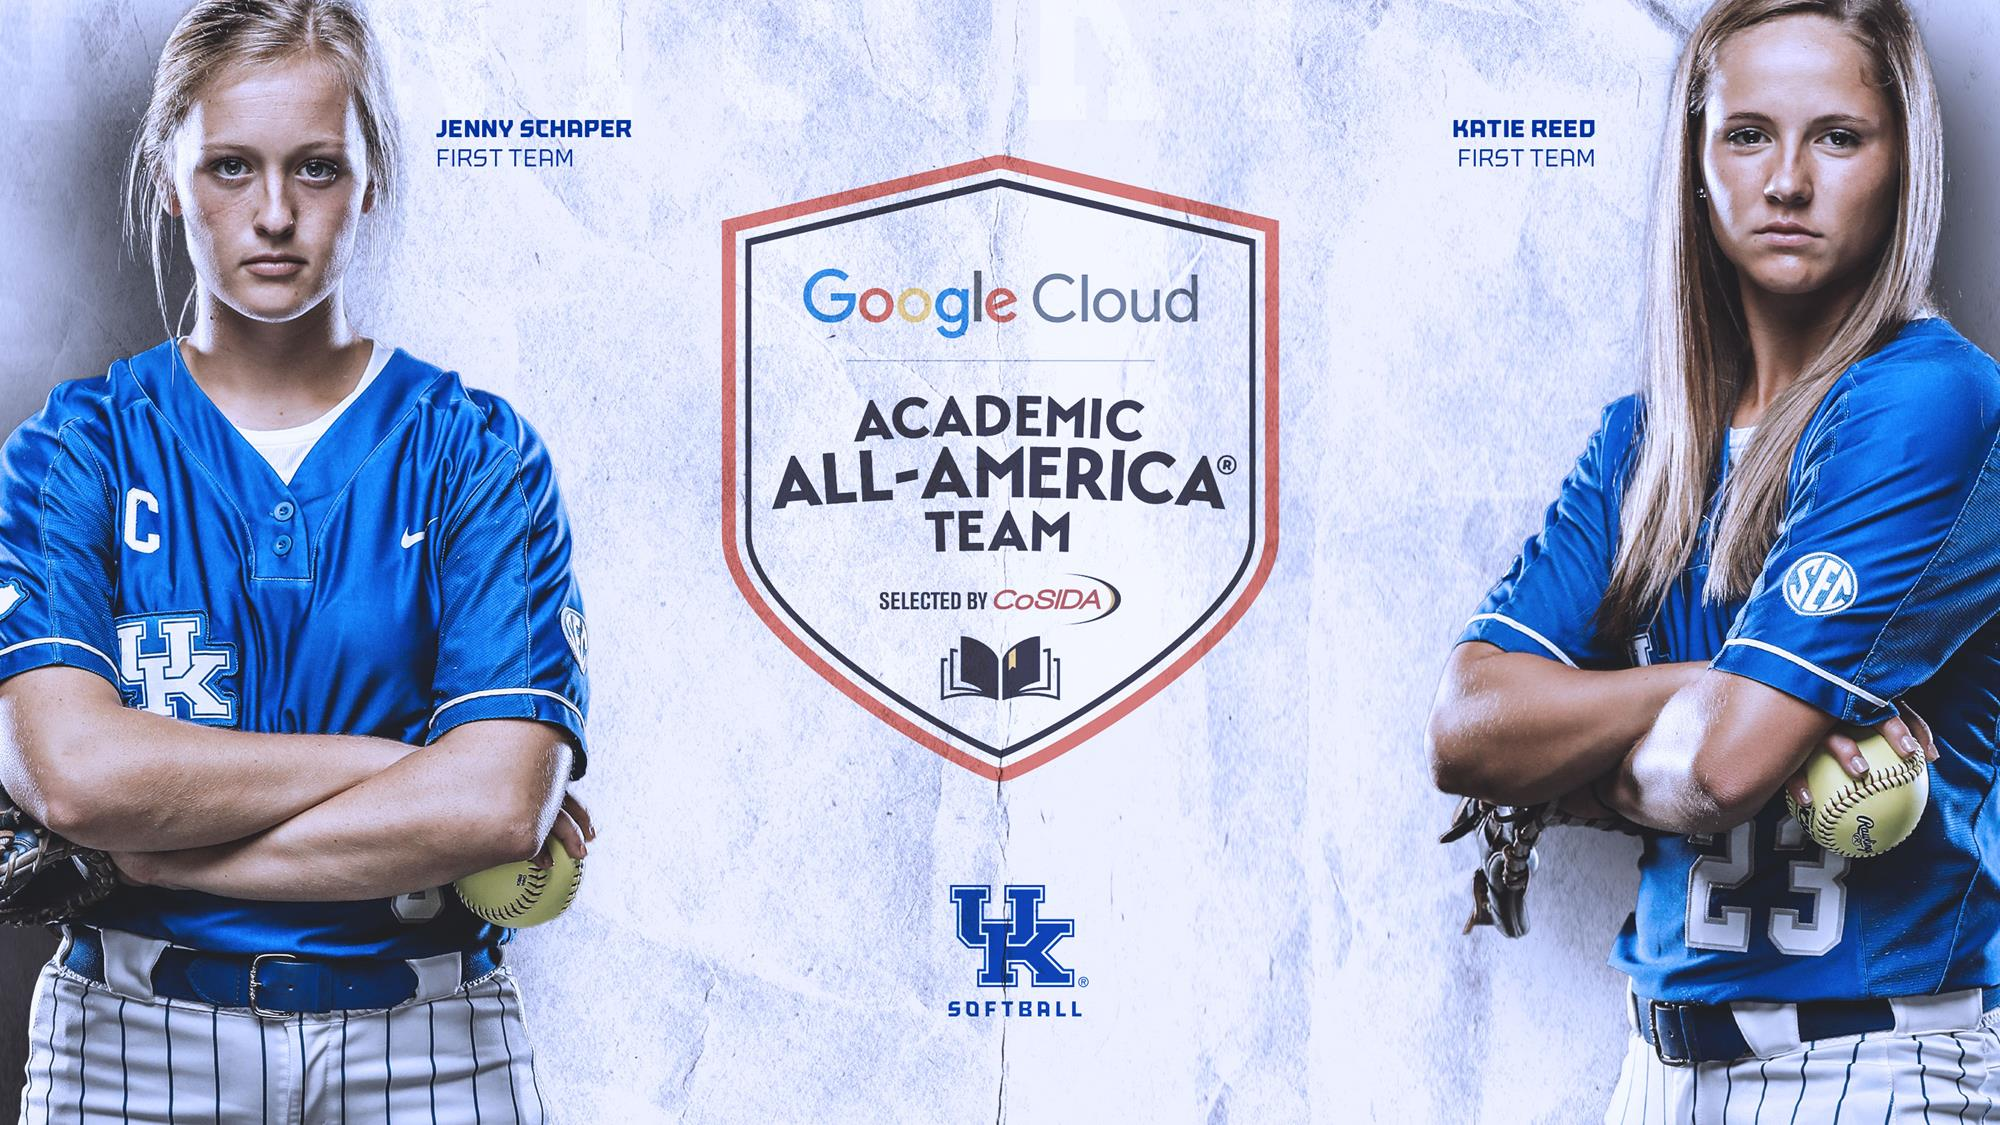 Schaper, Reed Named First Team CoSIDA Academic All-Americans